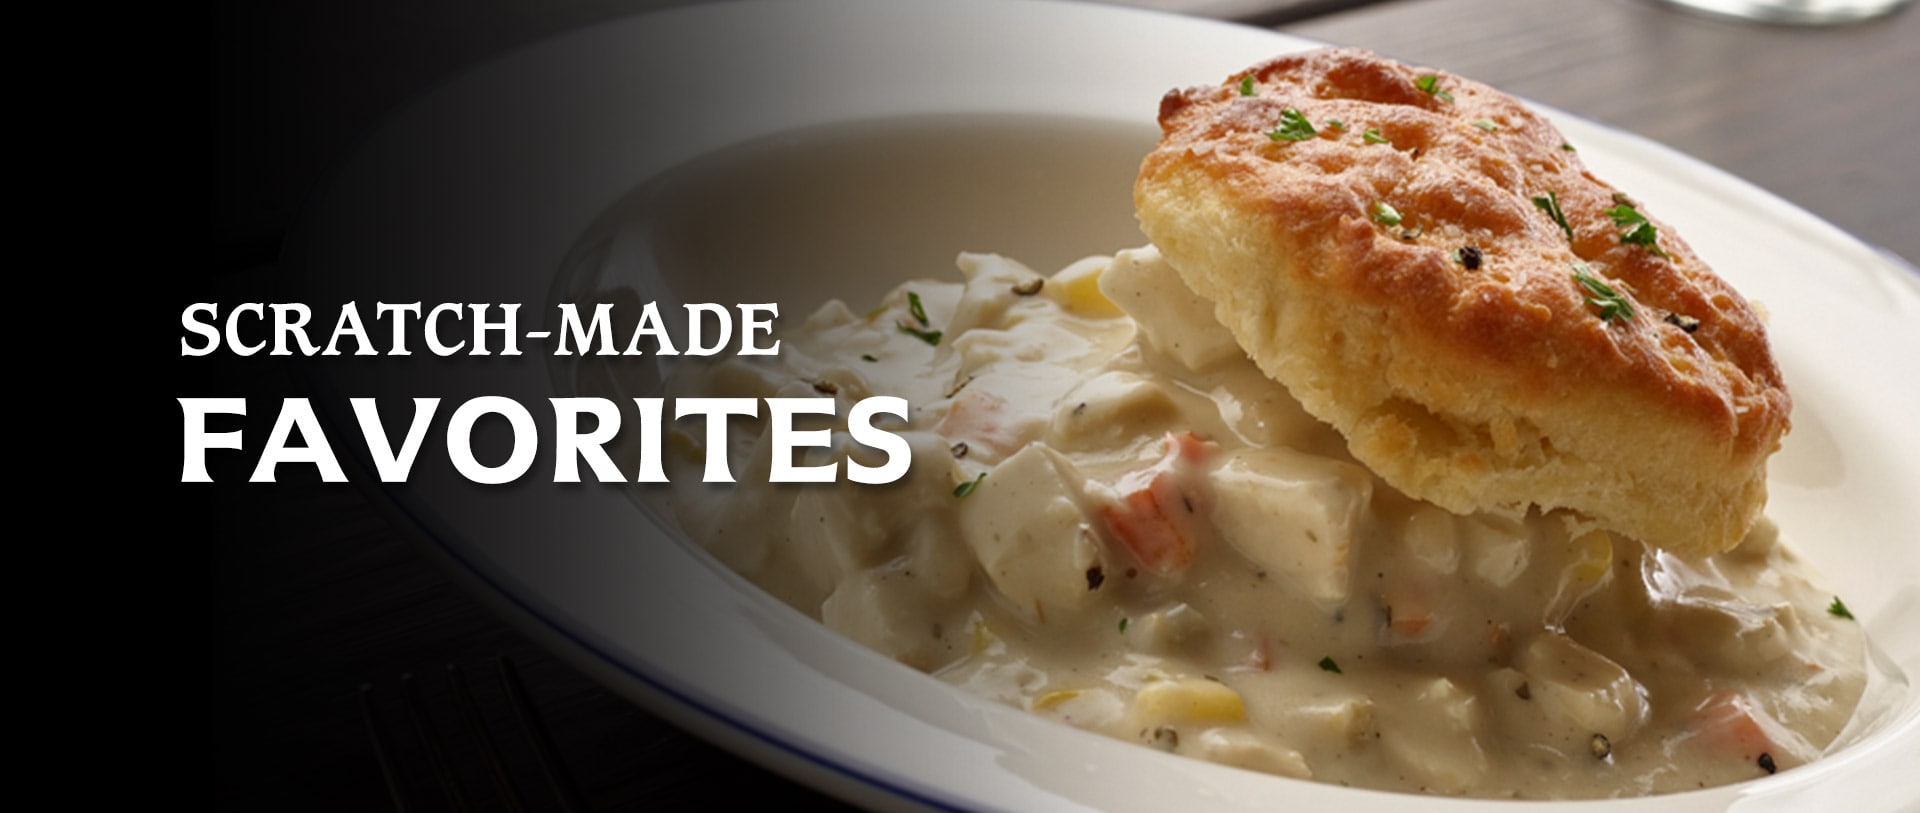 scratch made favorites - biscuit and chowder